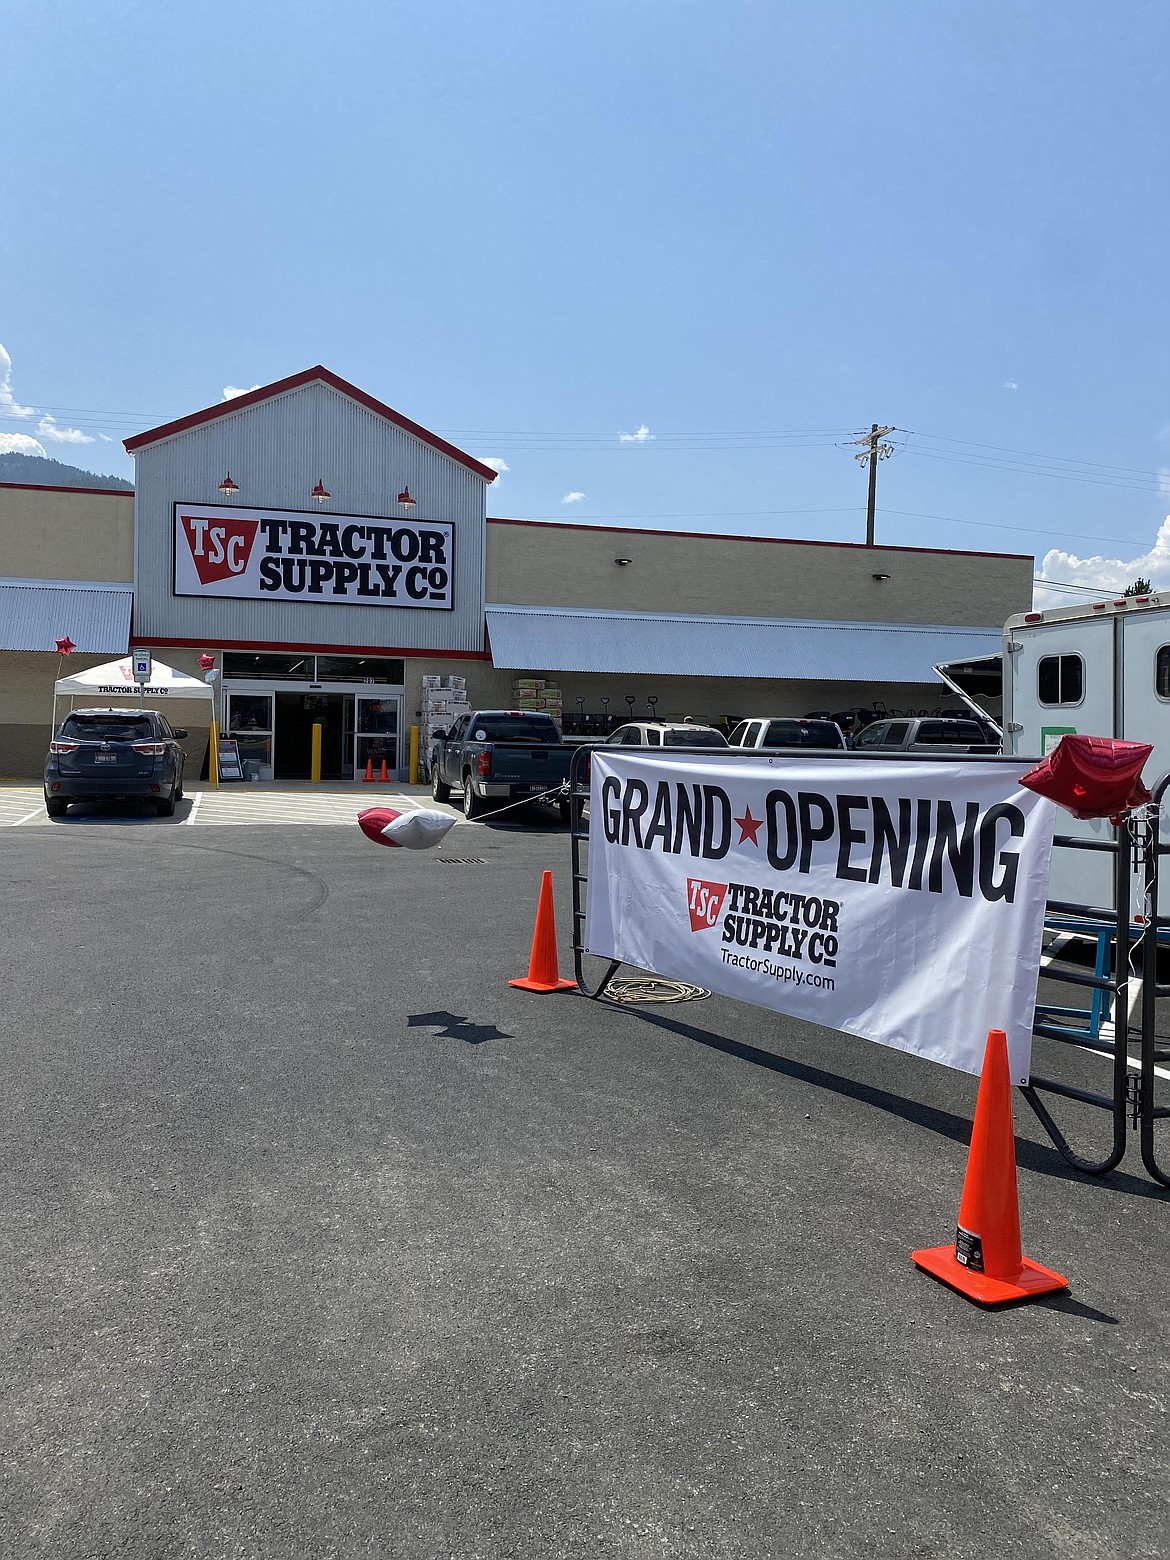 A new Tractor Supply Co. location has opened at 207 W. Cameron Ave., Kellogg.